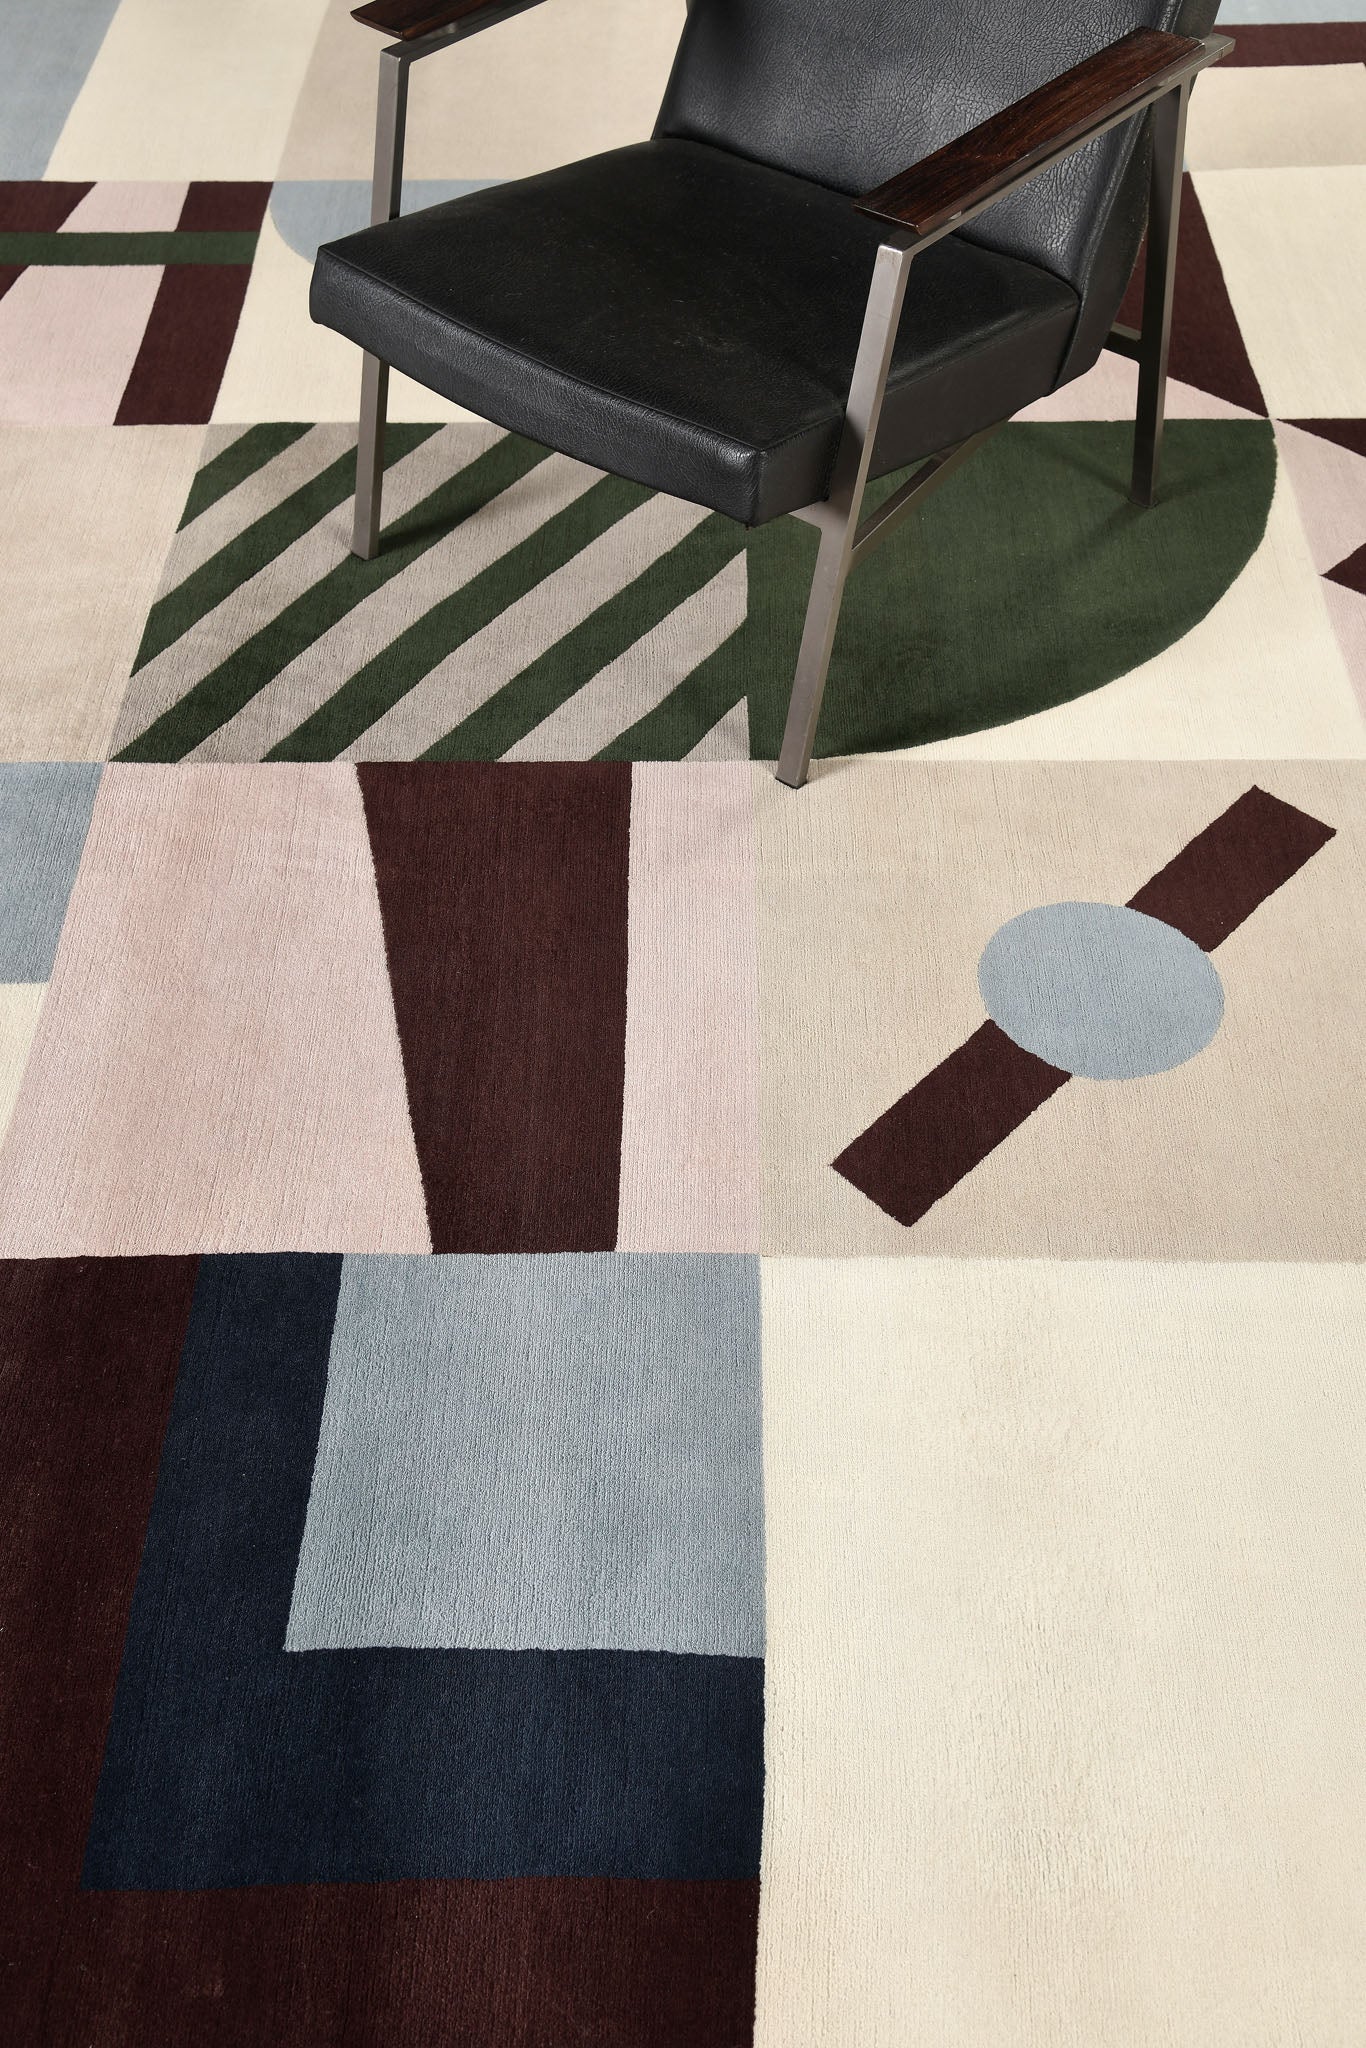 Modern Rug Image 9199 Pazzo, Baci Collection by Citizen Artist